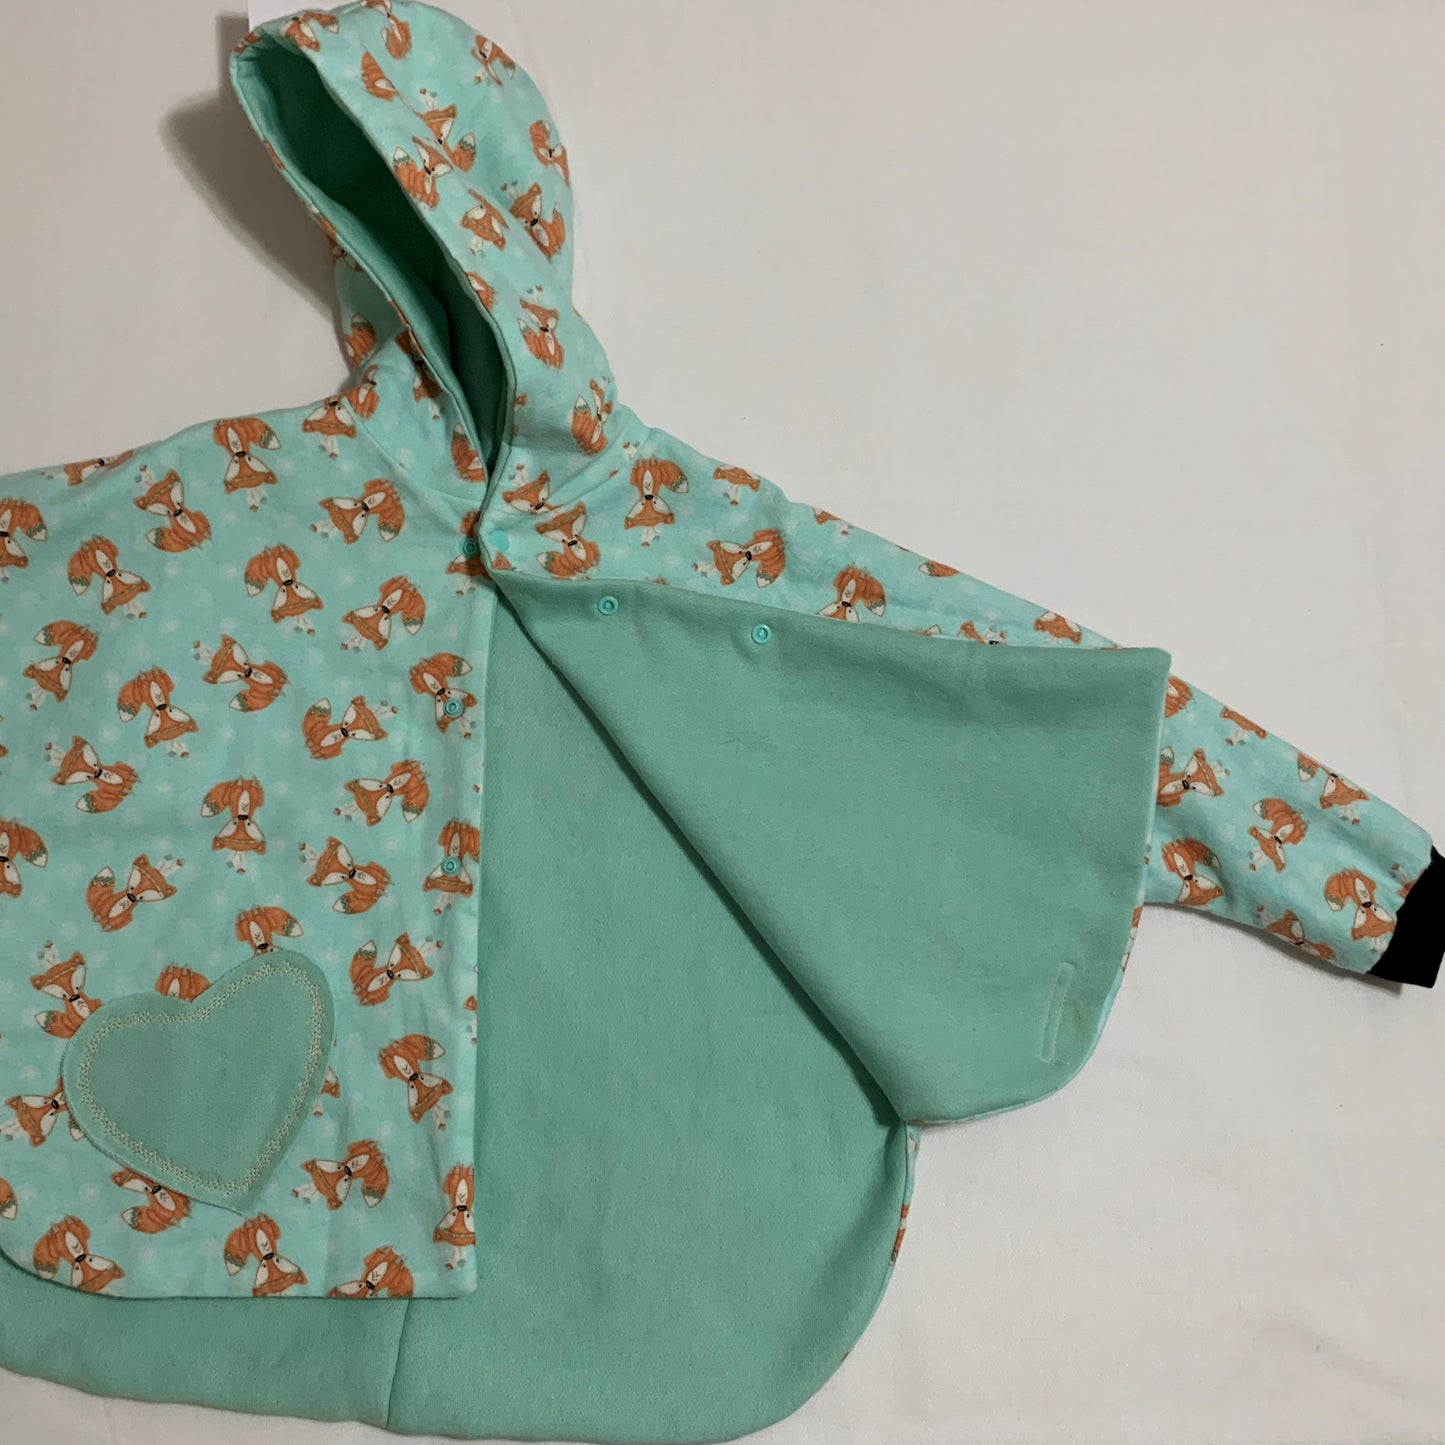 Coat - Poncho Coat/Jacket - Mint Green Lined, Fox Print, Hooded with Mint Green Heart Shape Pocket and Black Cuffs